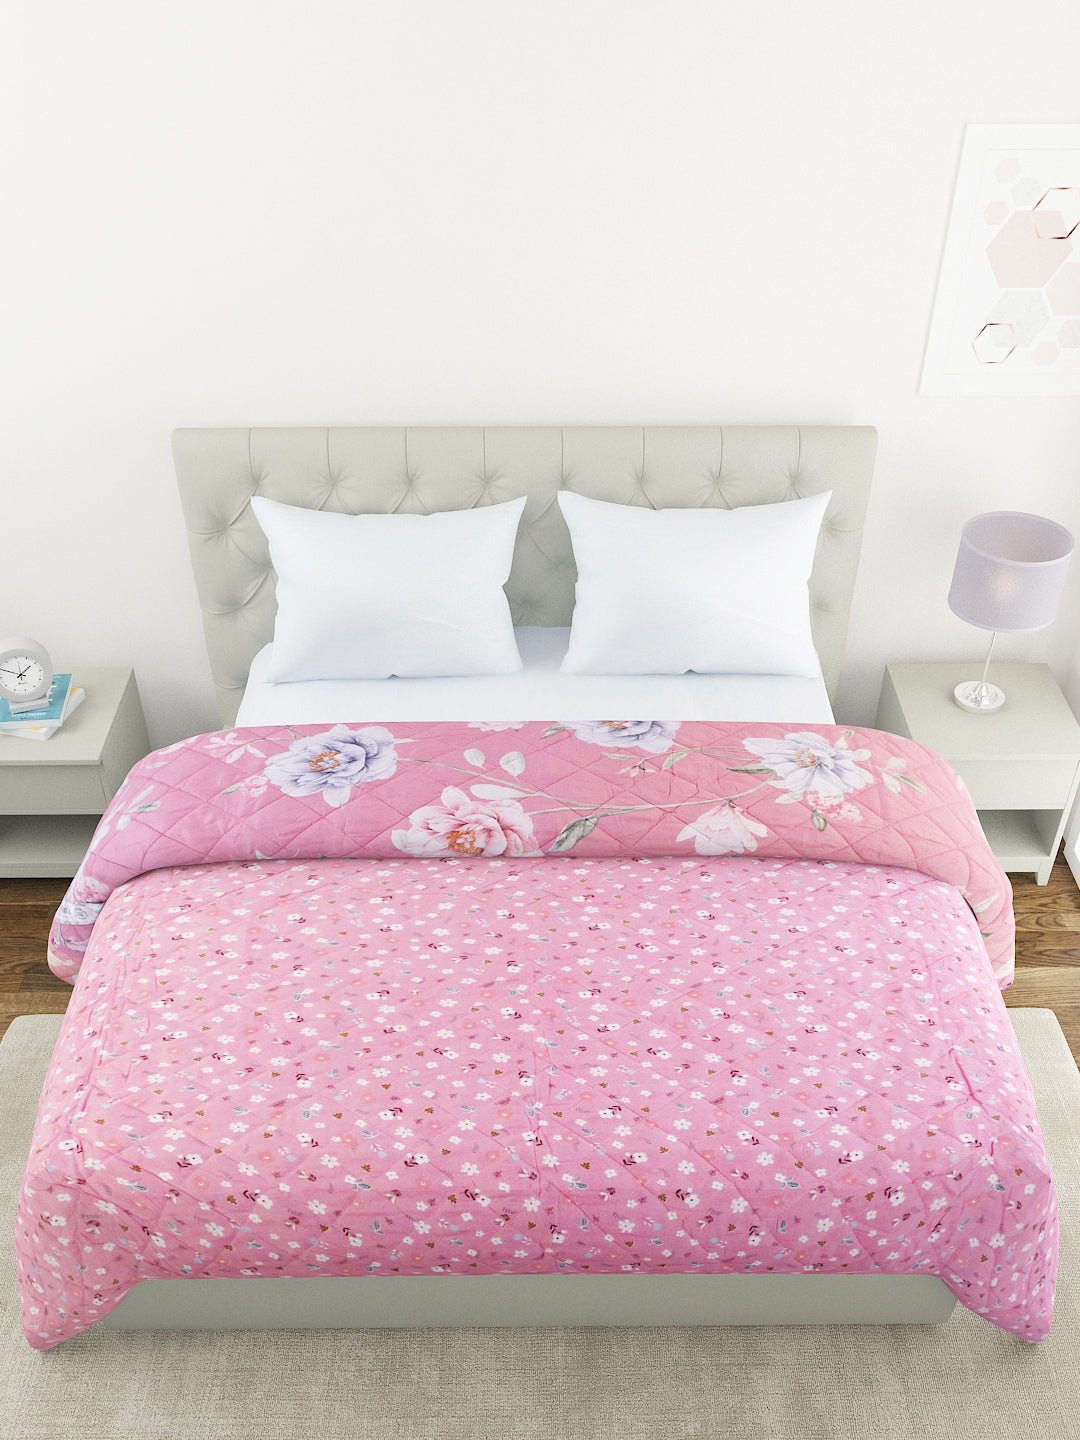 Floral Print Double Bed Light Weight Comforter-Pink